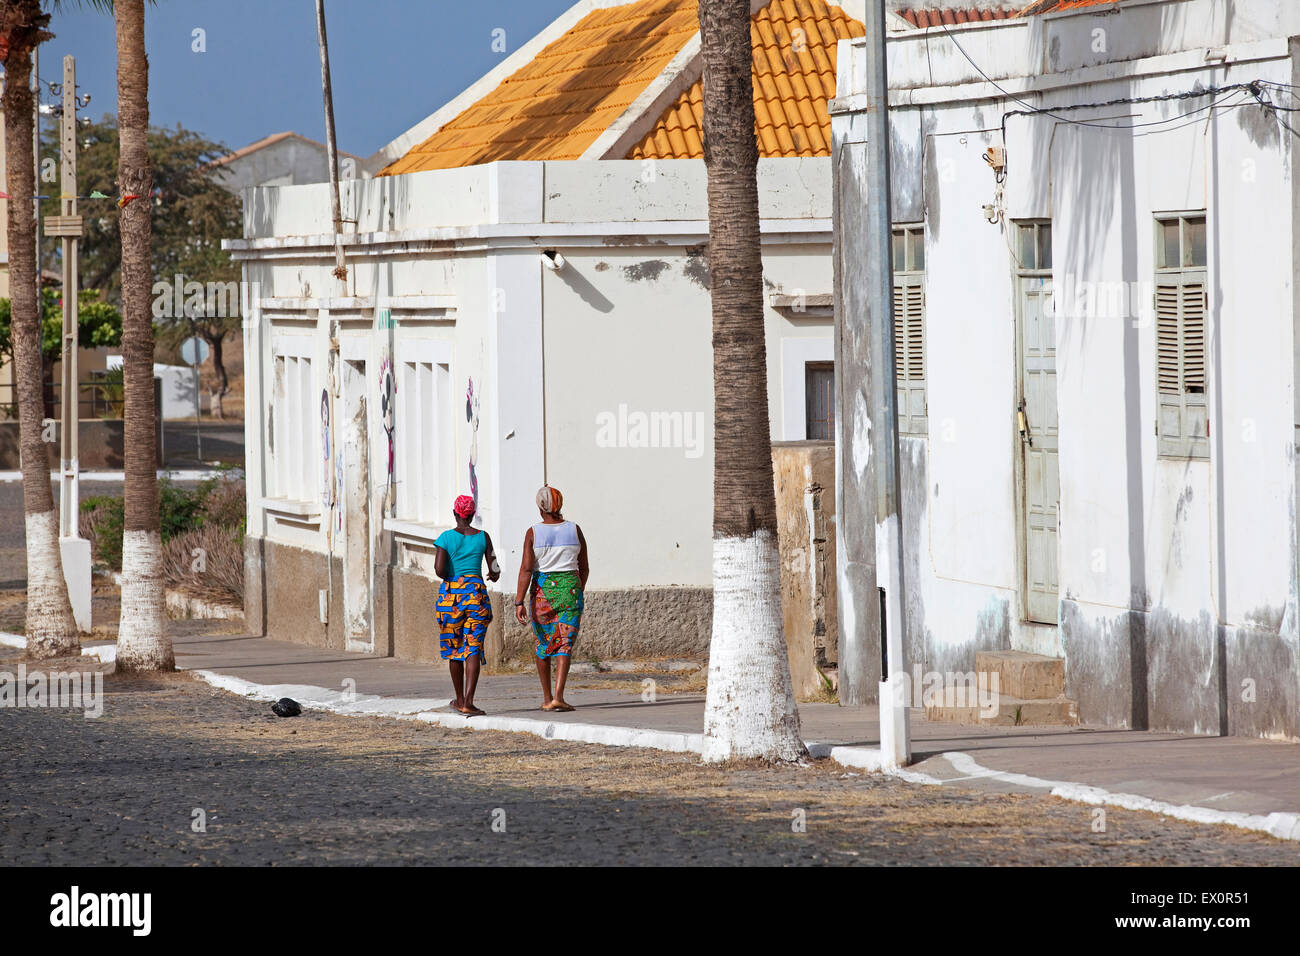 Creole women walking in street along white colonial buildings of the town Tarrafal on the island Santiago, Cape Verde, Africa Stock Photo